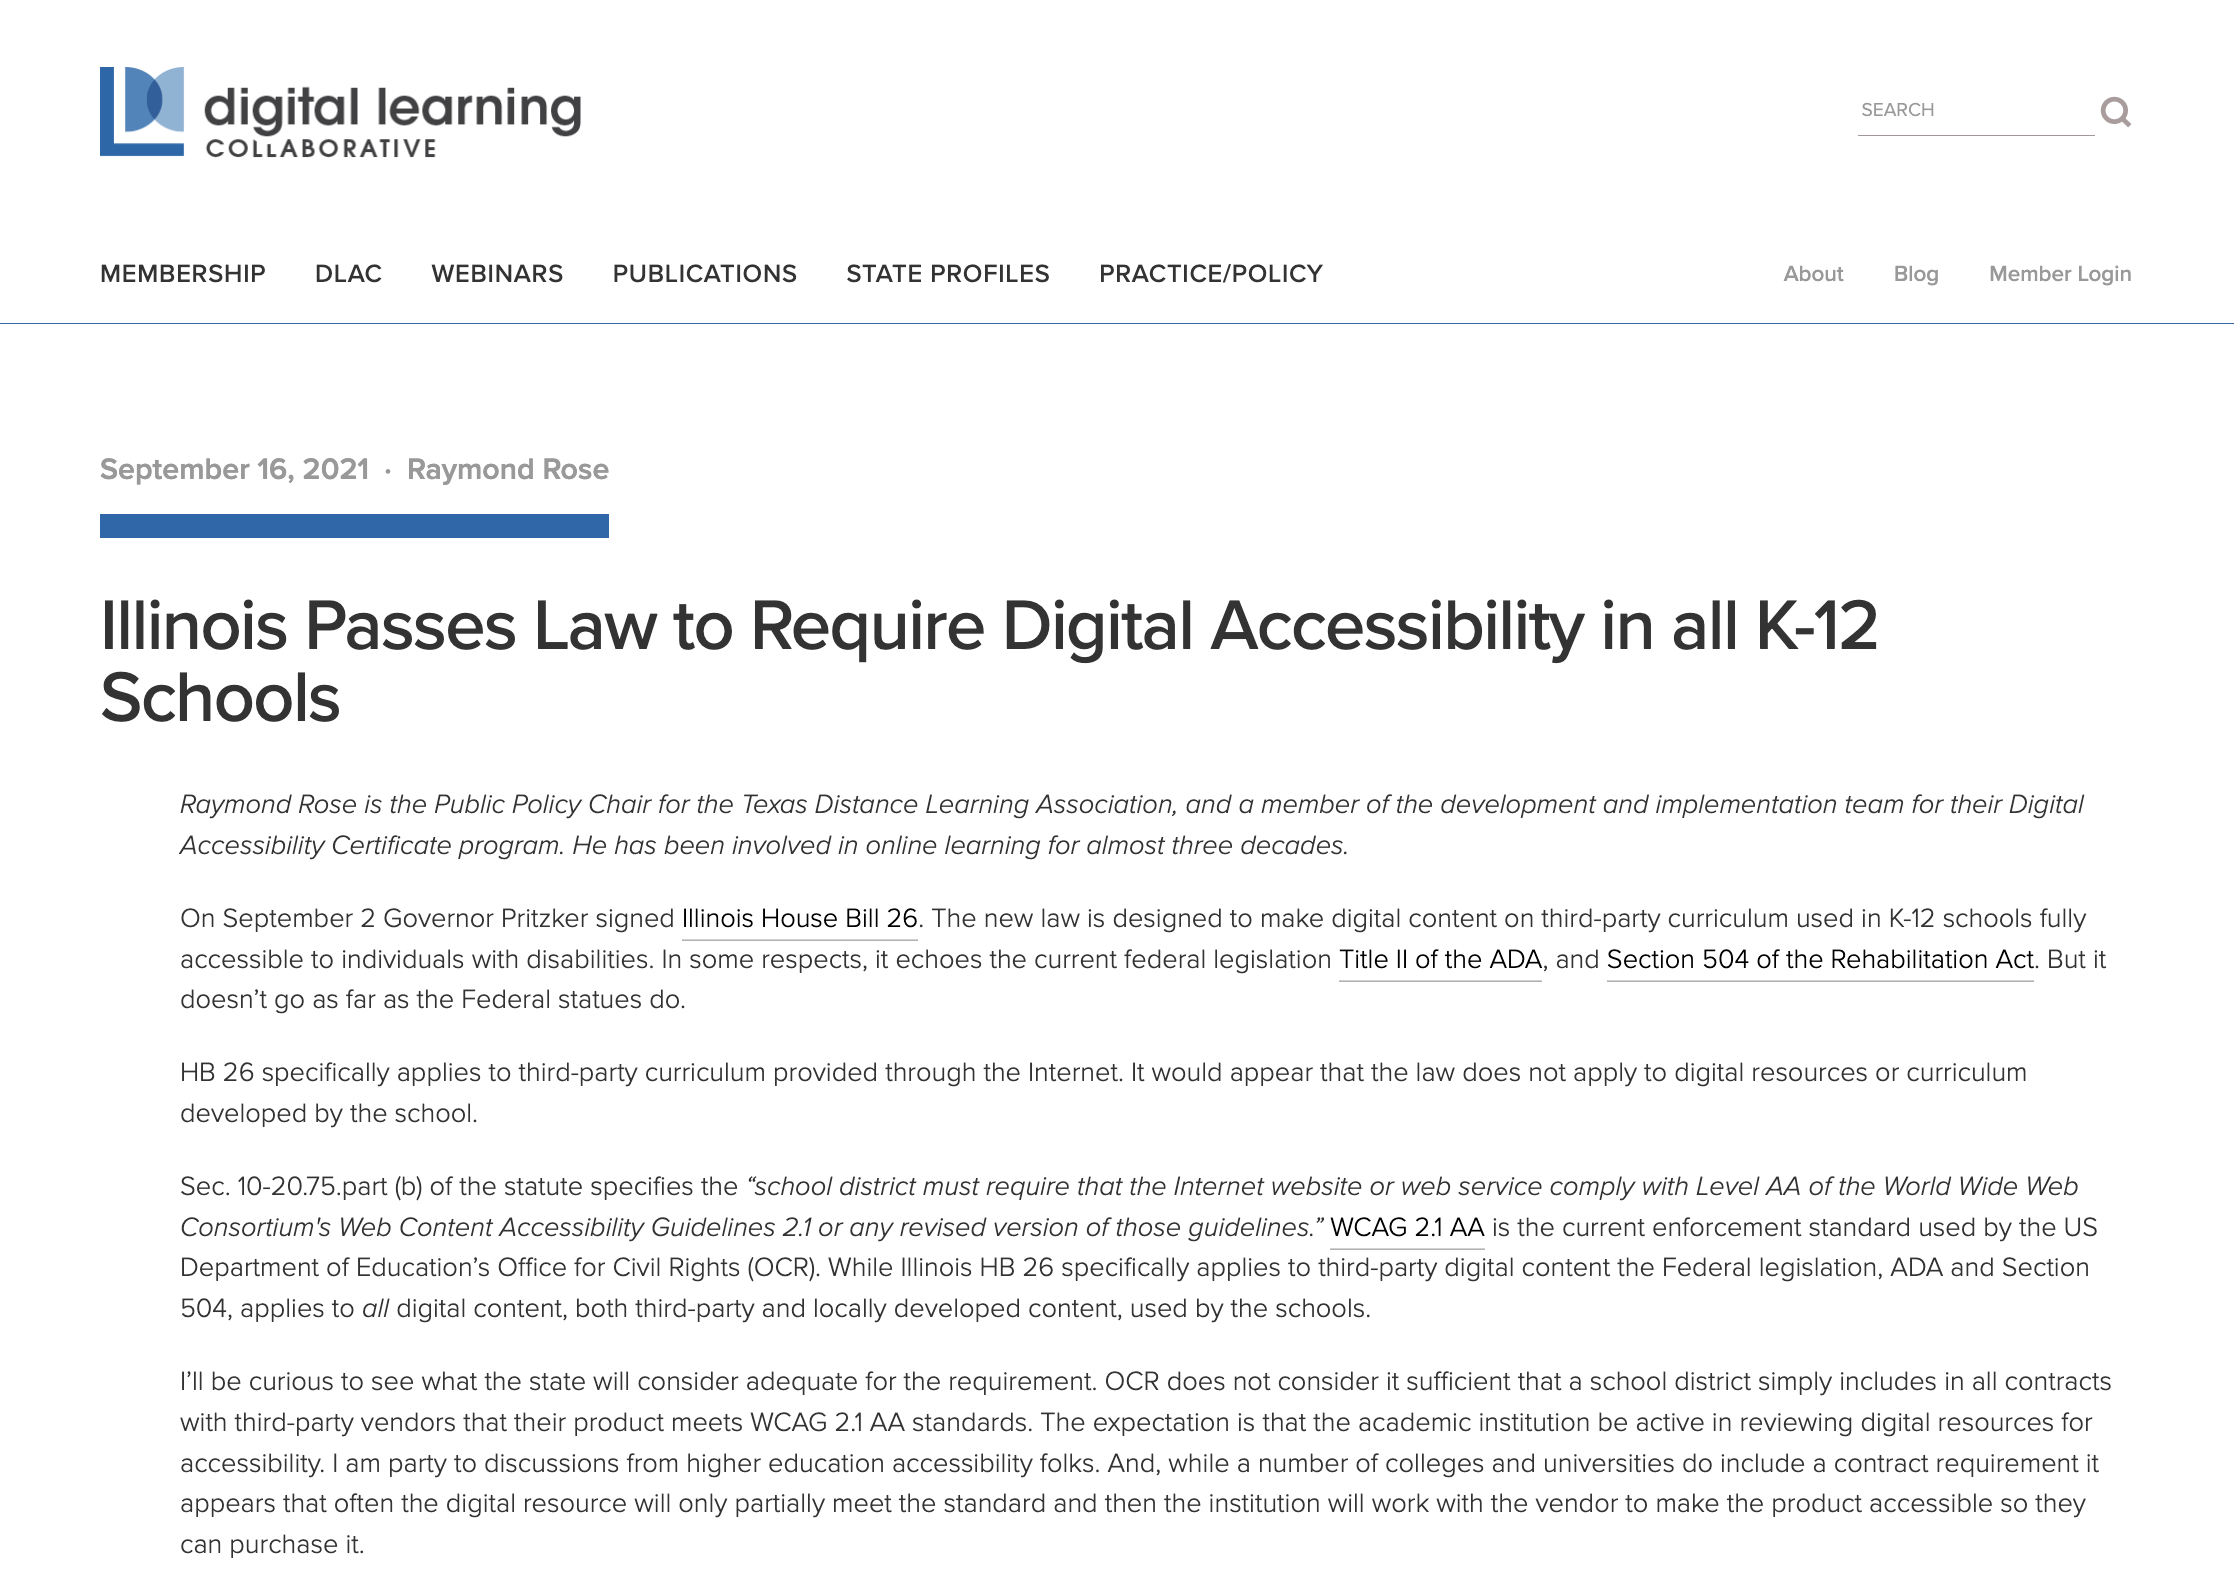 Article from The Digital Learning Collaborative titled 'Illinois Passes Law to Require Digital Accessibility in all K-12 Schools'